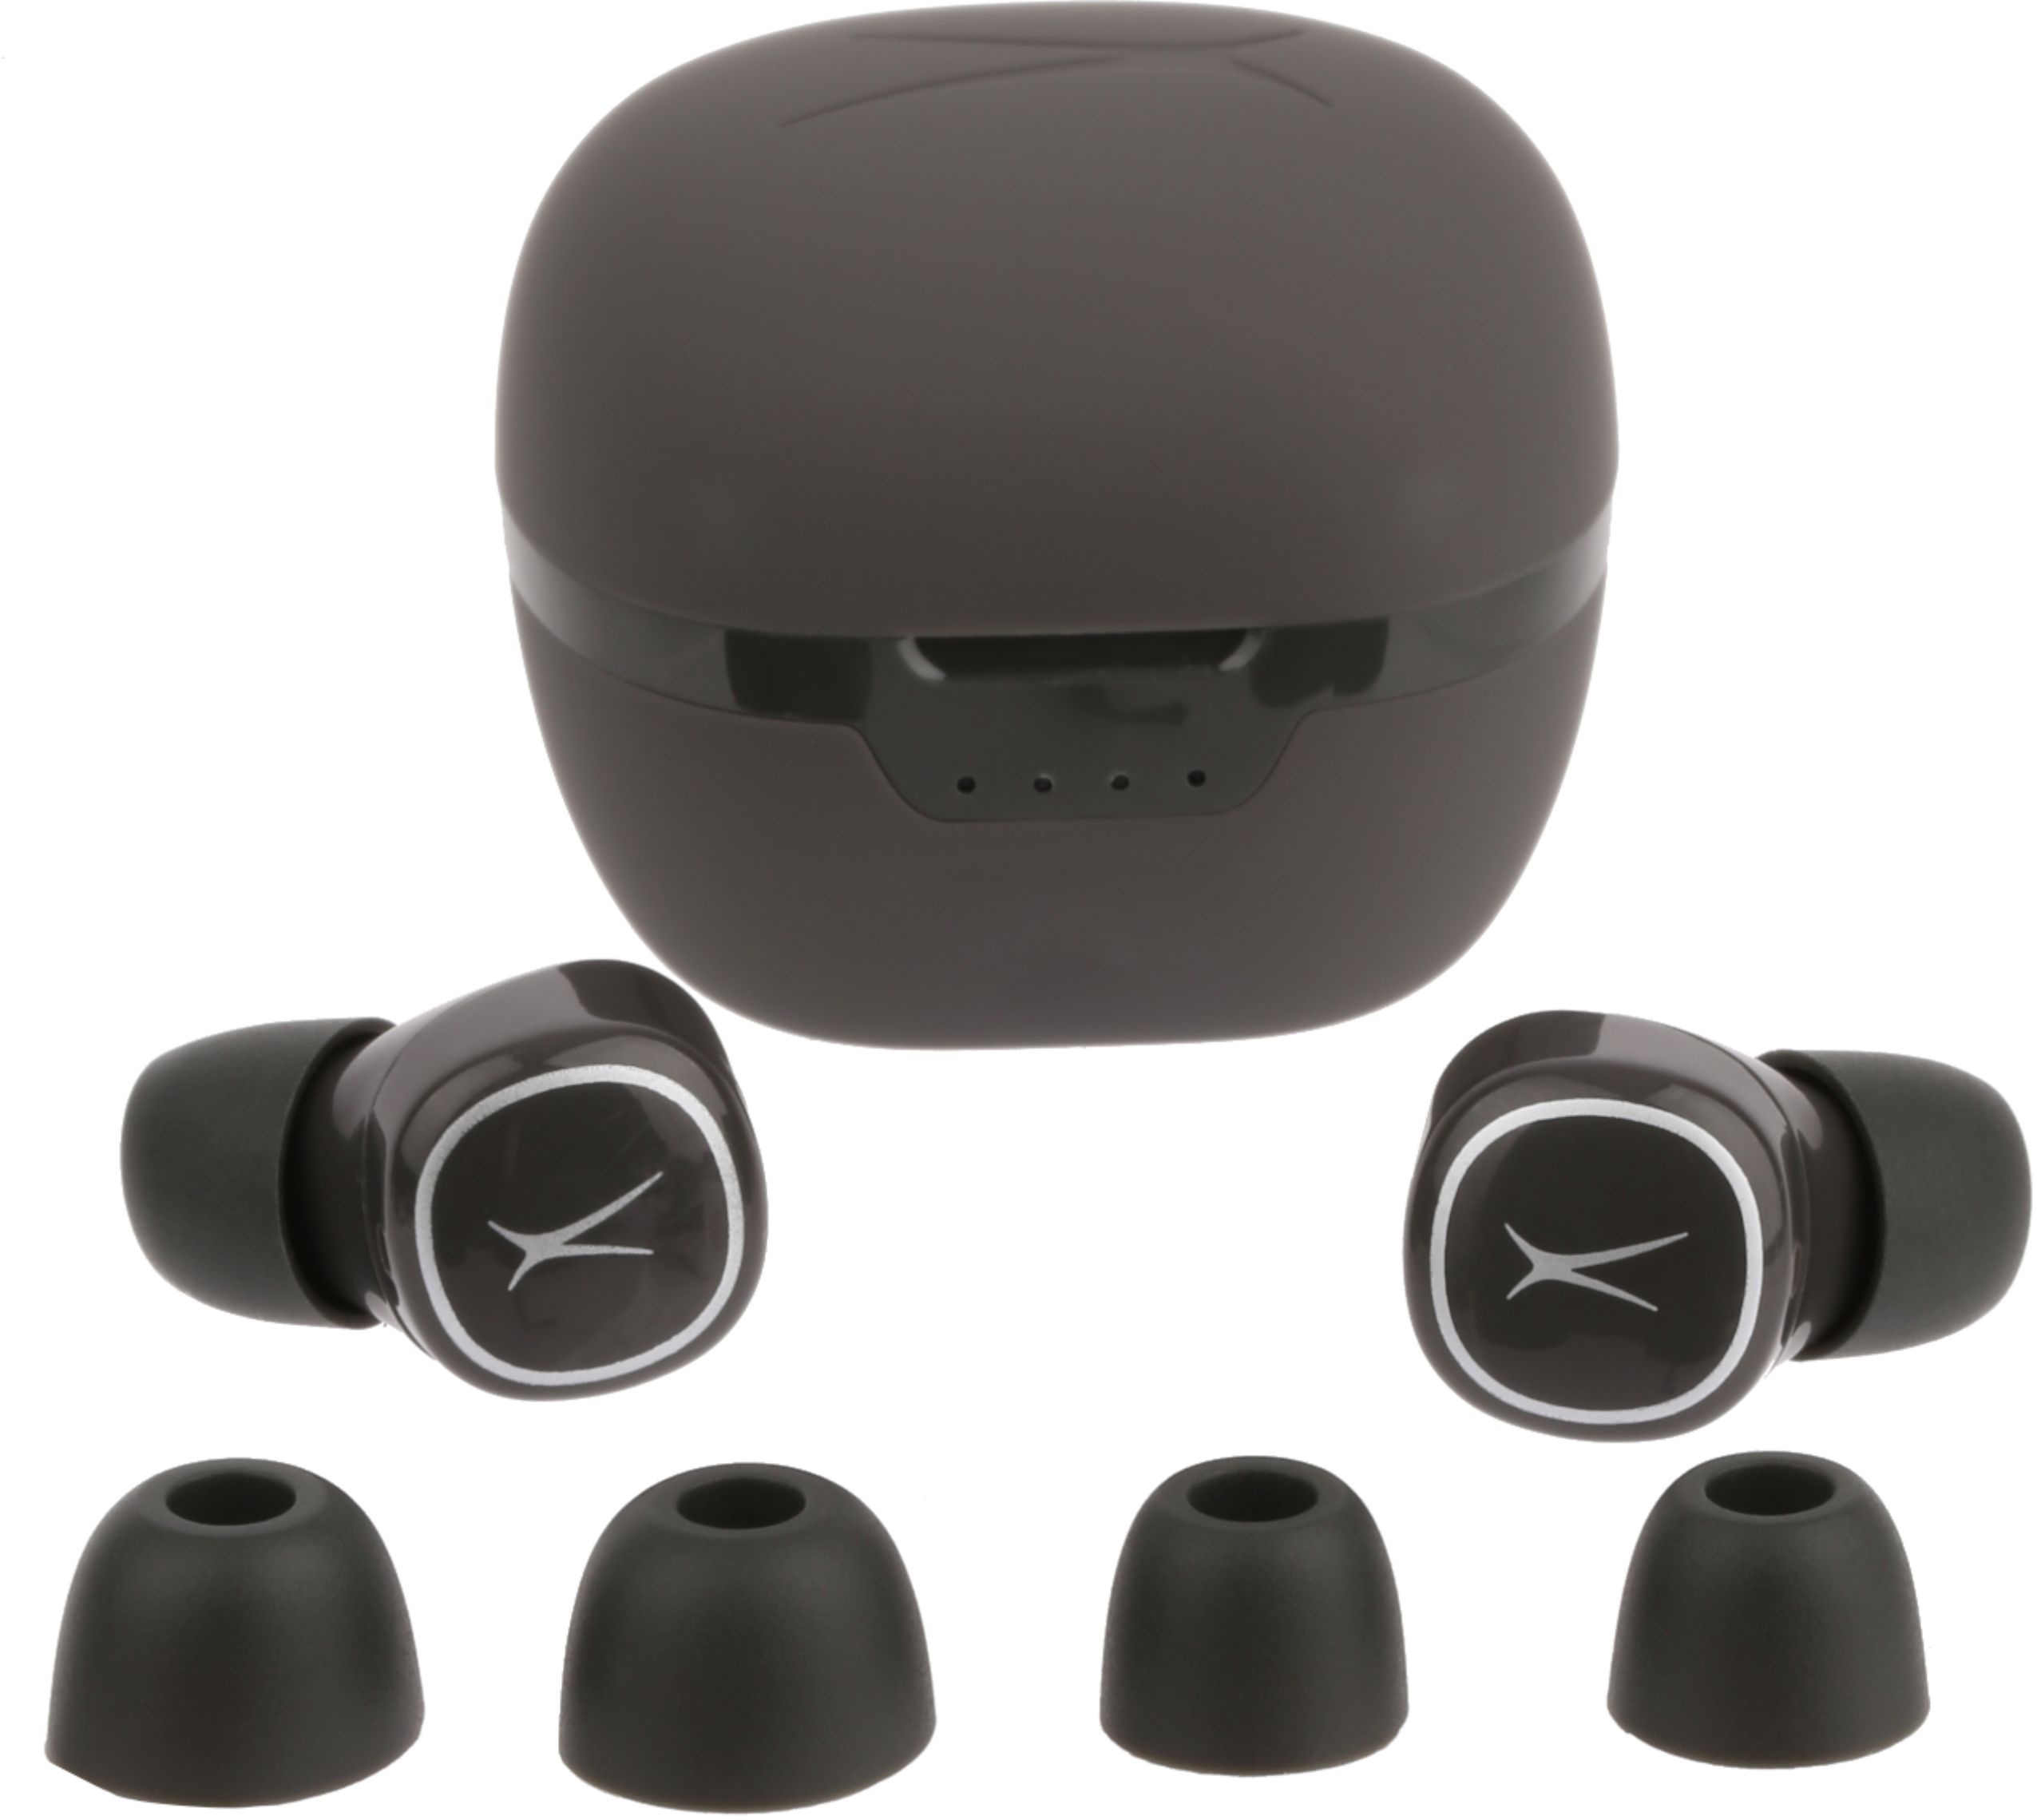 Questions and Answers: Altec Lansing NanoBuds2.0 True Wireless In-Ear ...